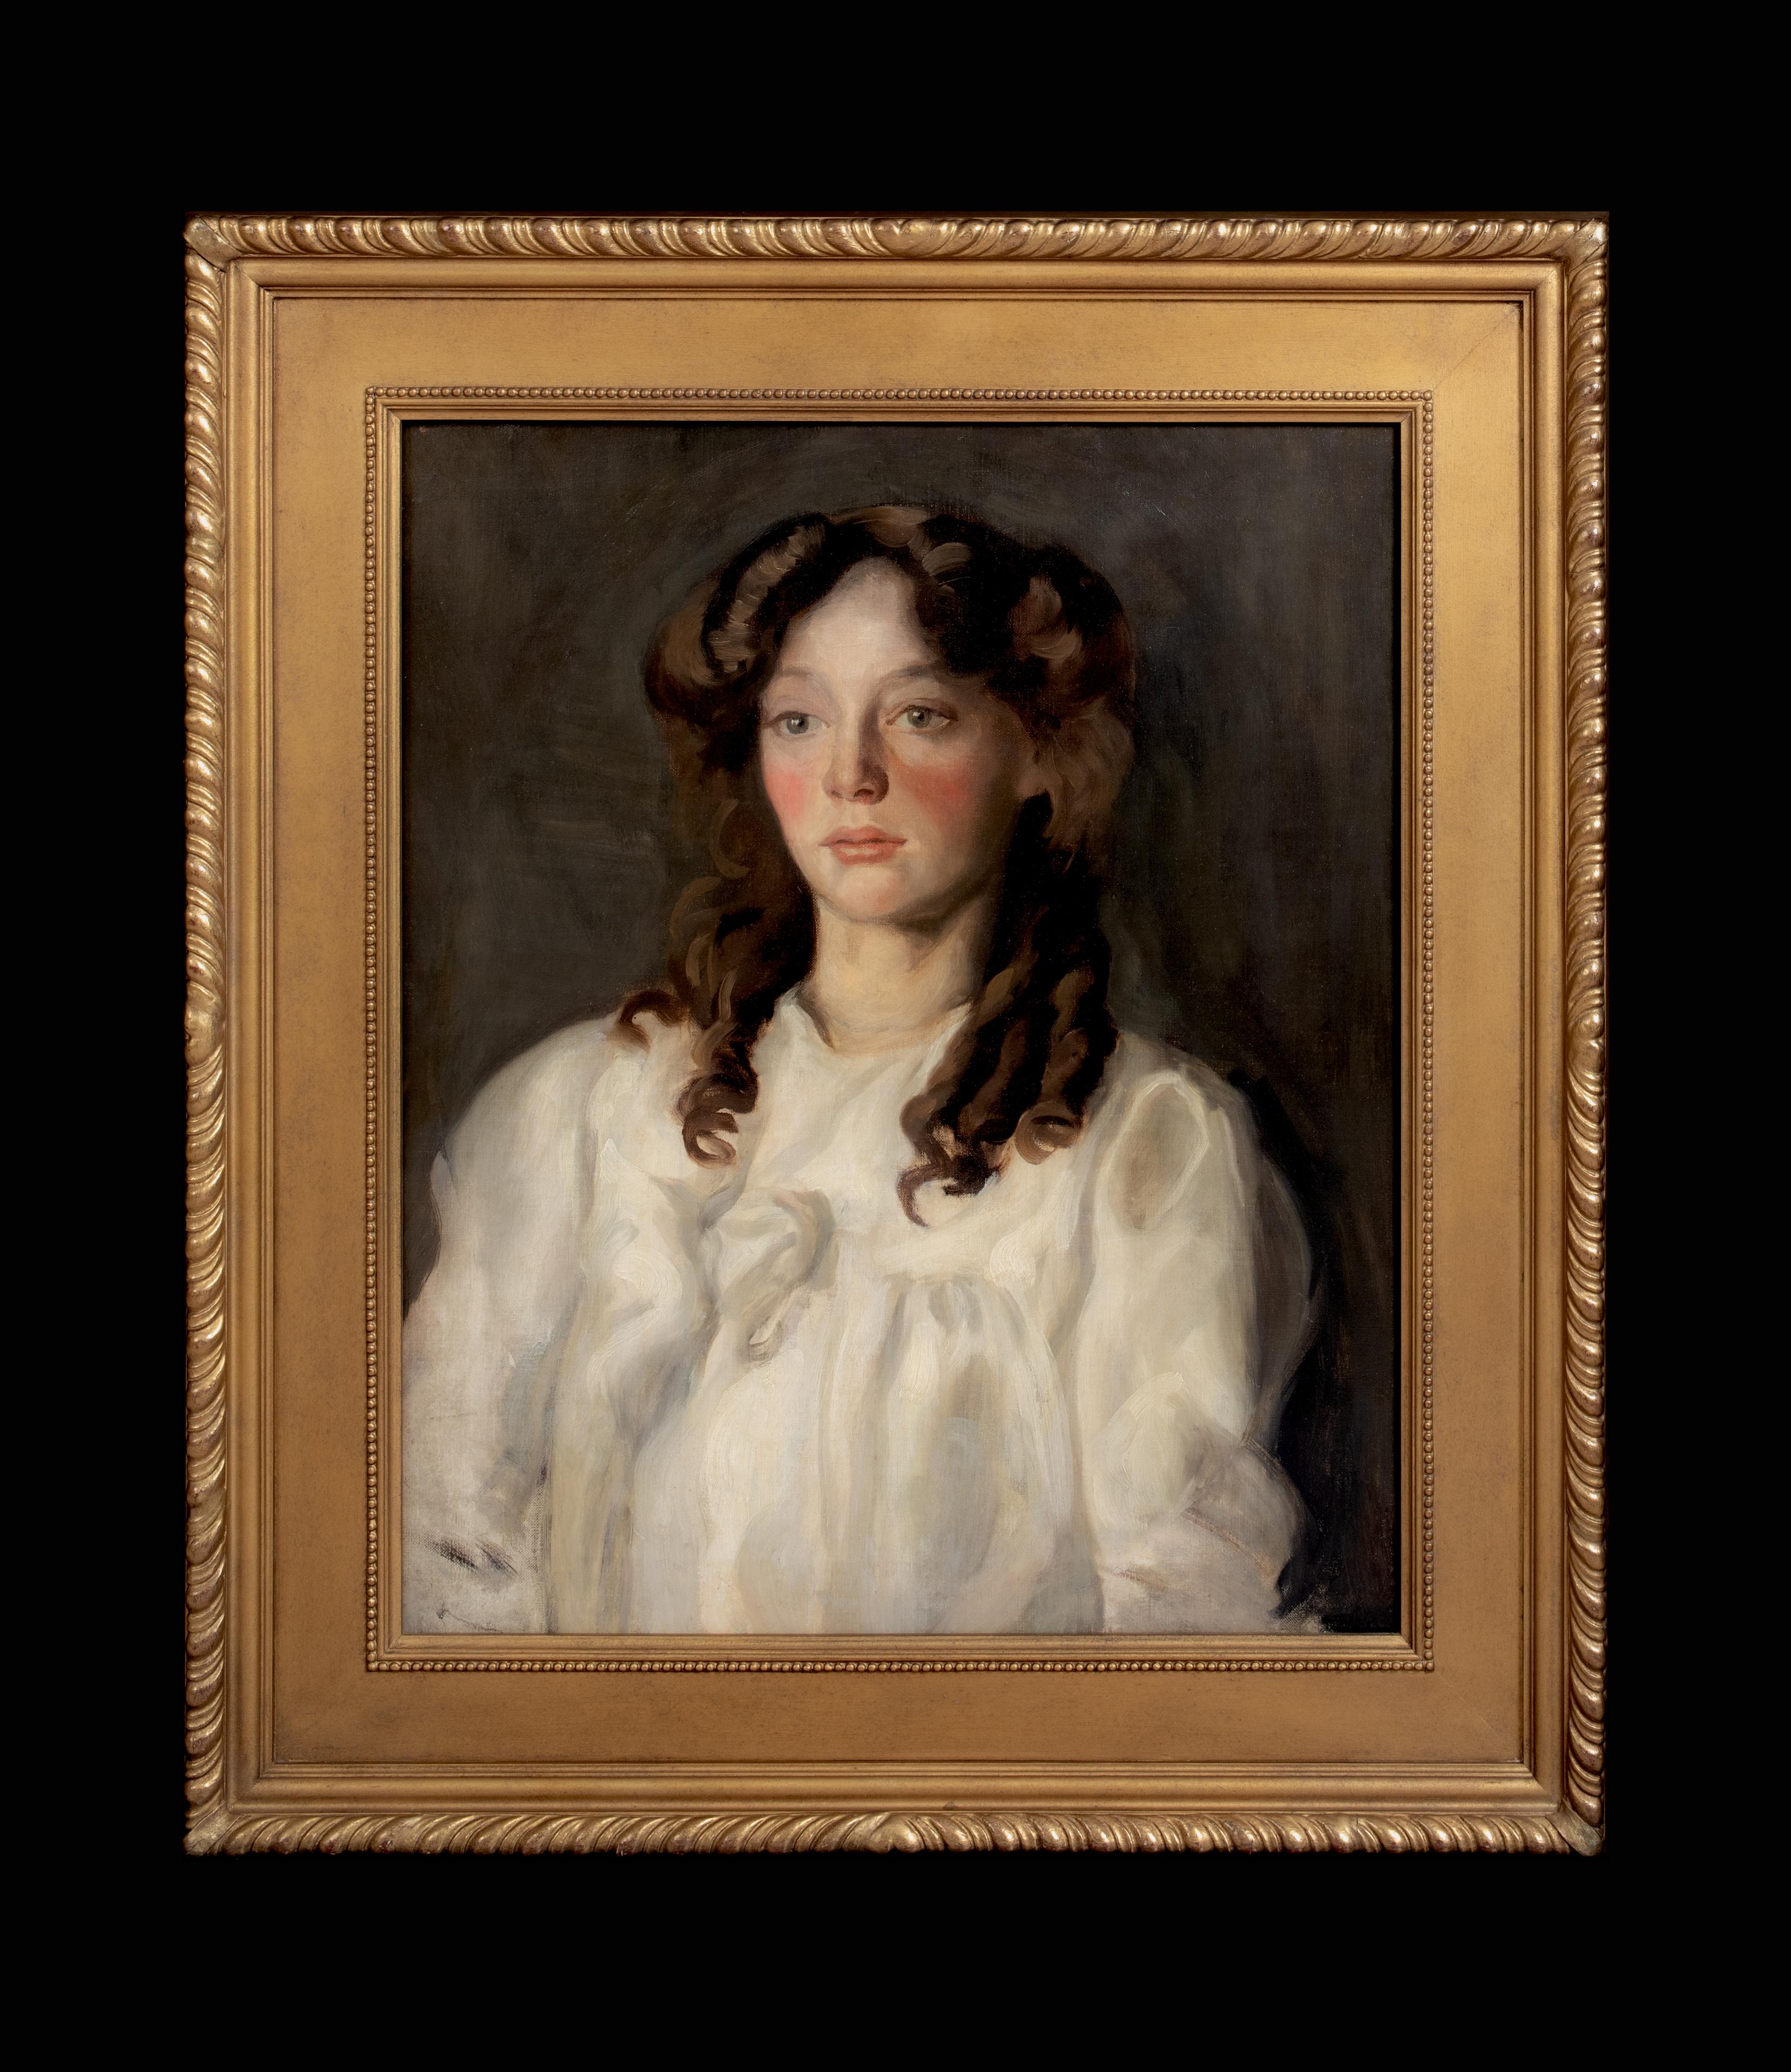 Portrait Of A Girl In White, circa 1900  Portrait Of A Girl In White Hugh RAMSAY - Painting by Unknown